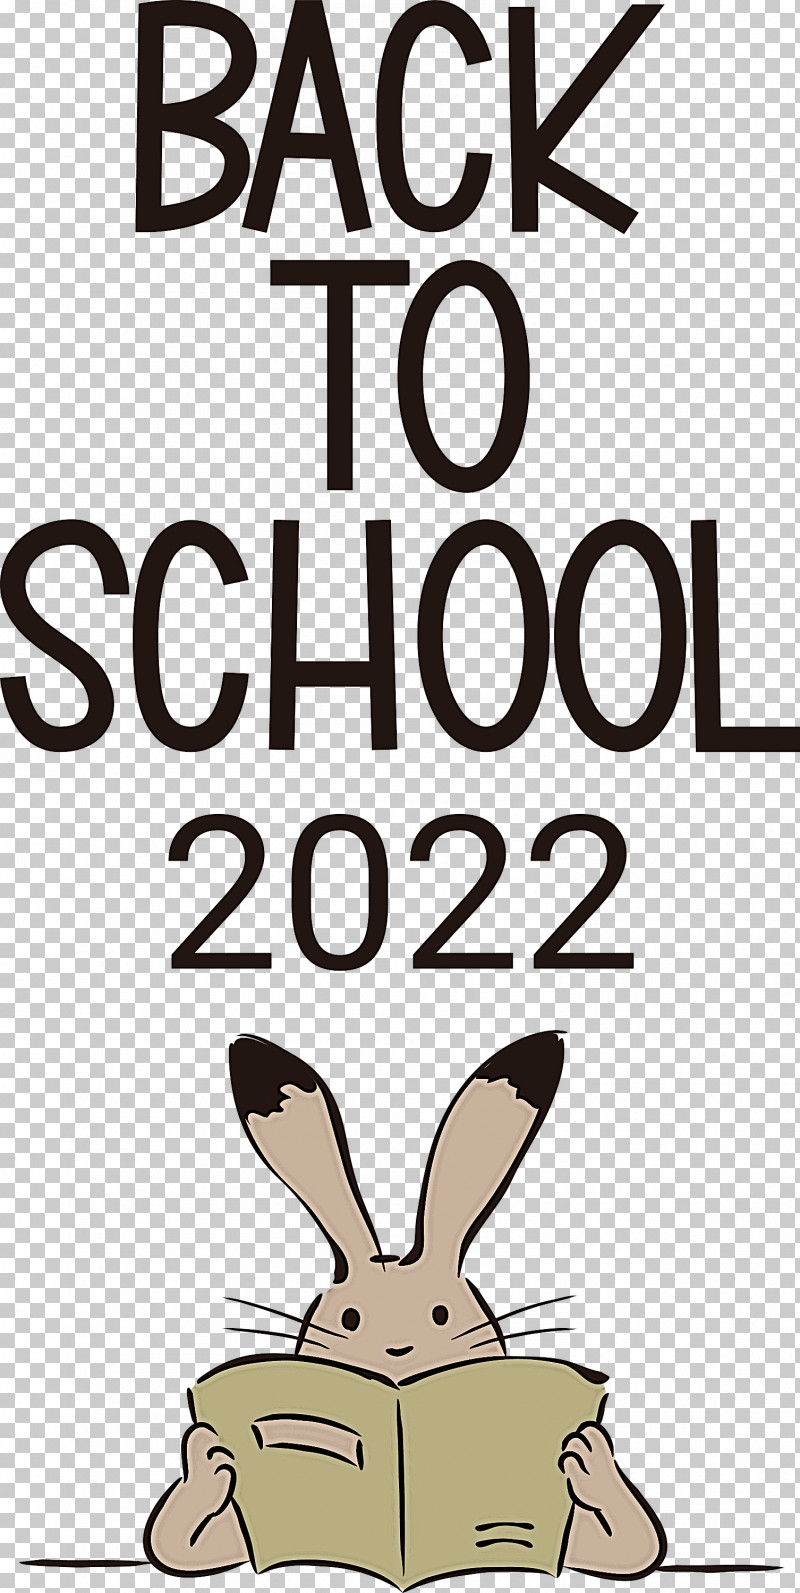 Back To School 2022 Education PNG, Clipart, Behavior, Biology, Cartoon, Education, Happiness Free PNG Download